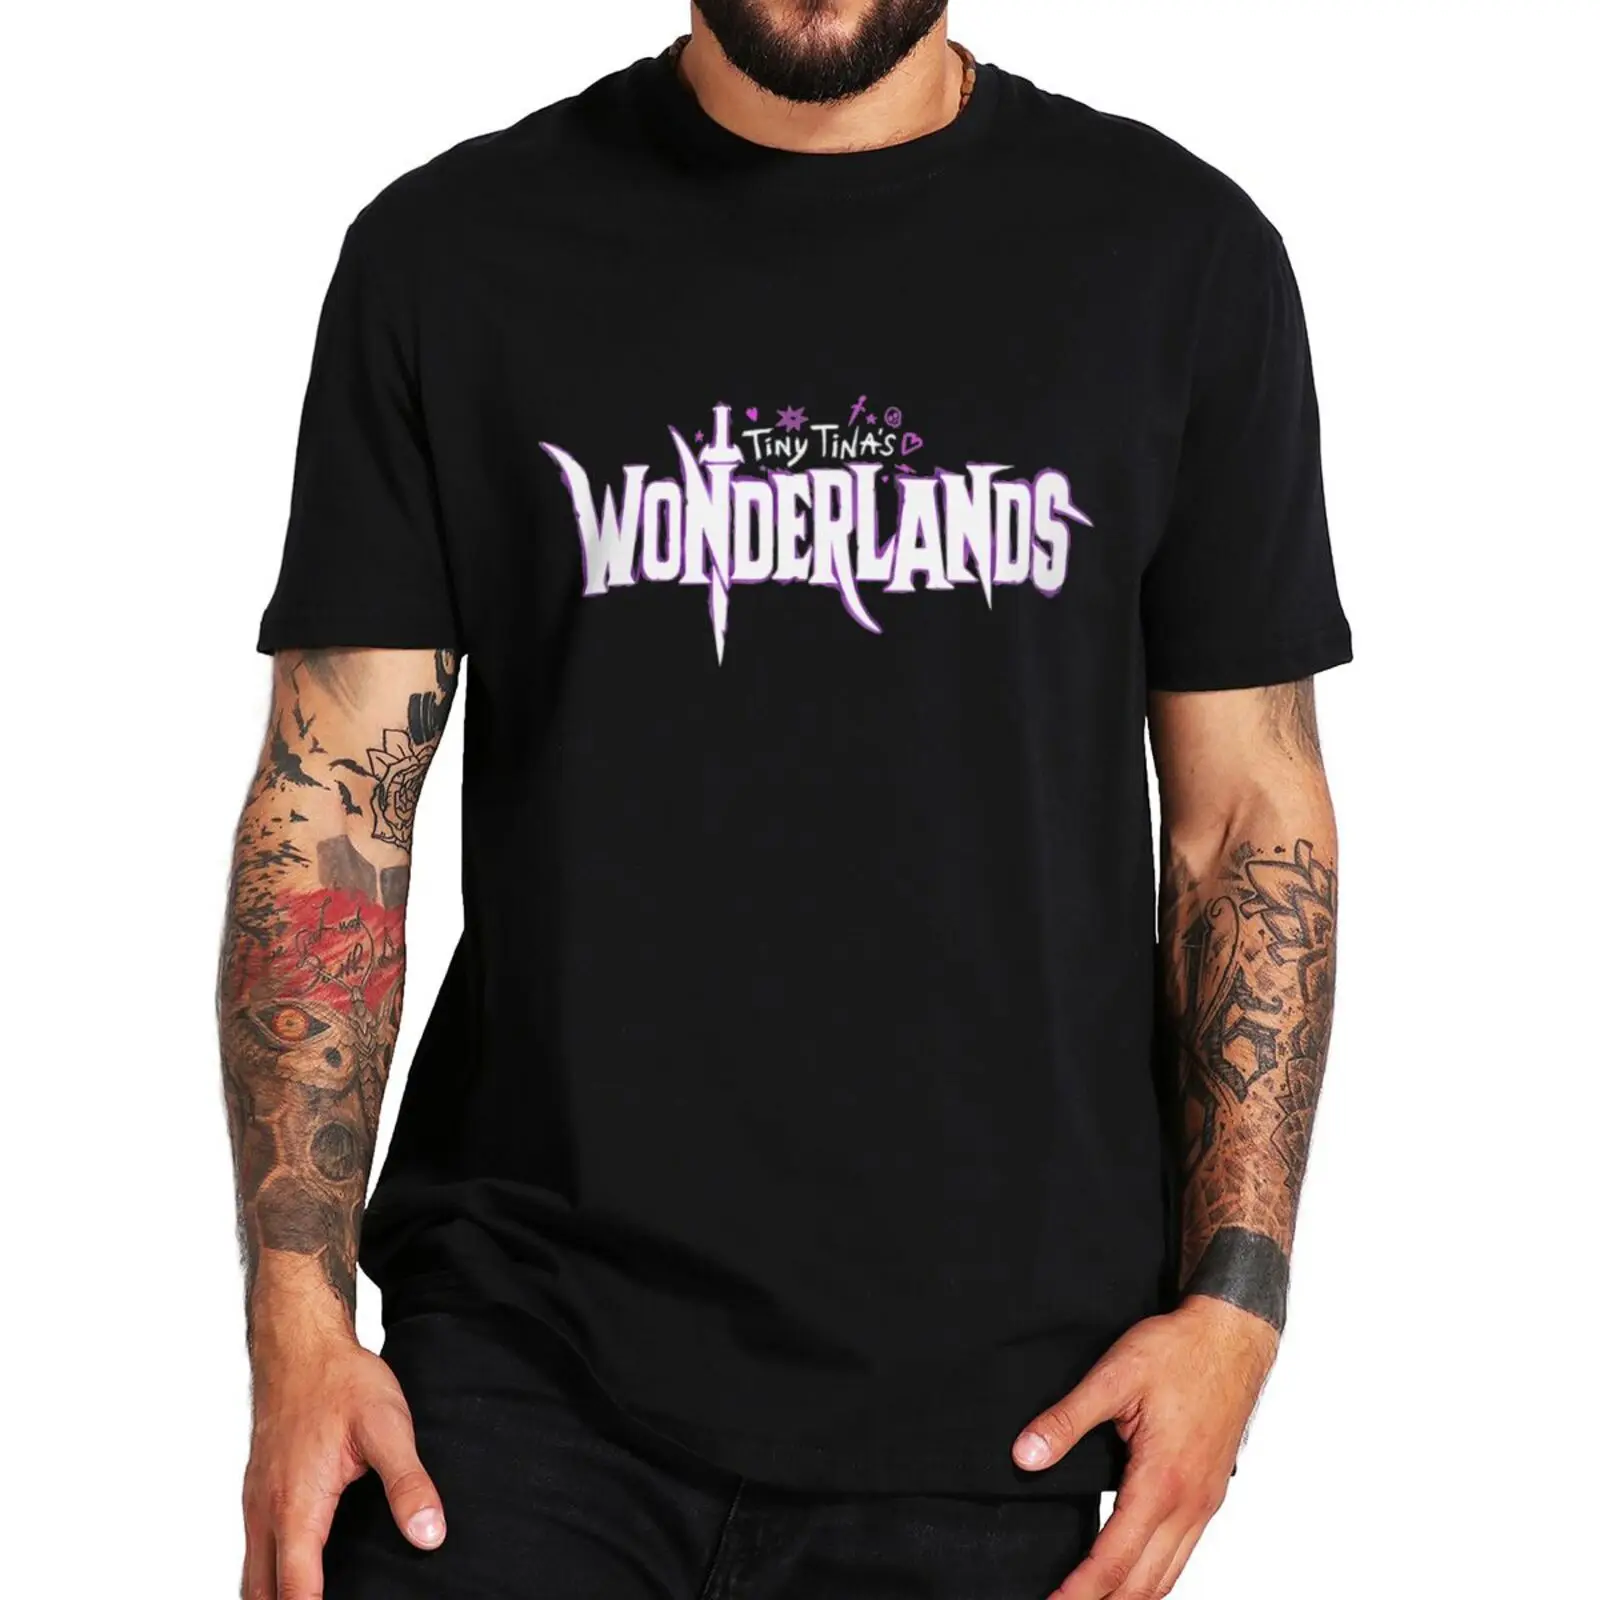 

Tiny Tina's Wonderlands White T-shirt 2022 First-person Shooter Game Lovers T Shirt For Men Women Summer Casual Cotton Tee Tops